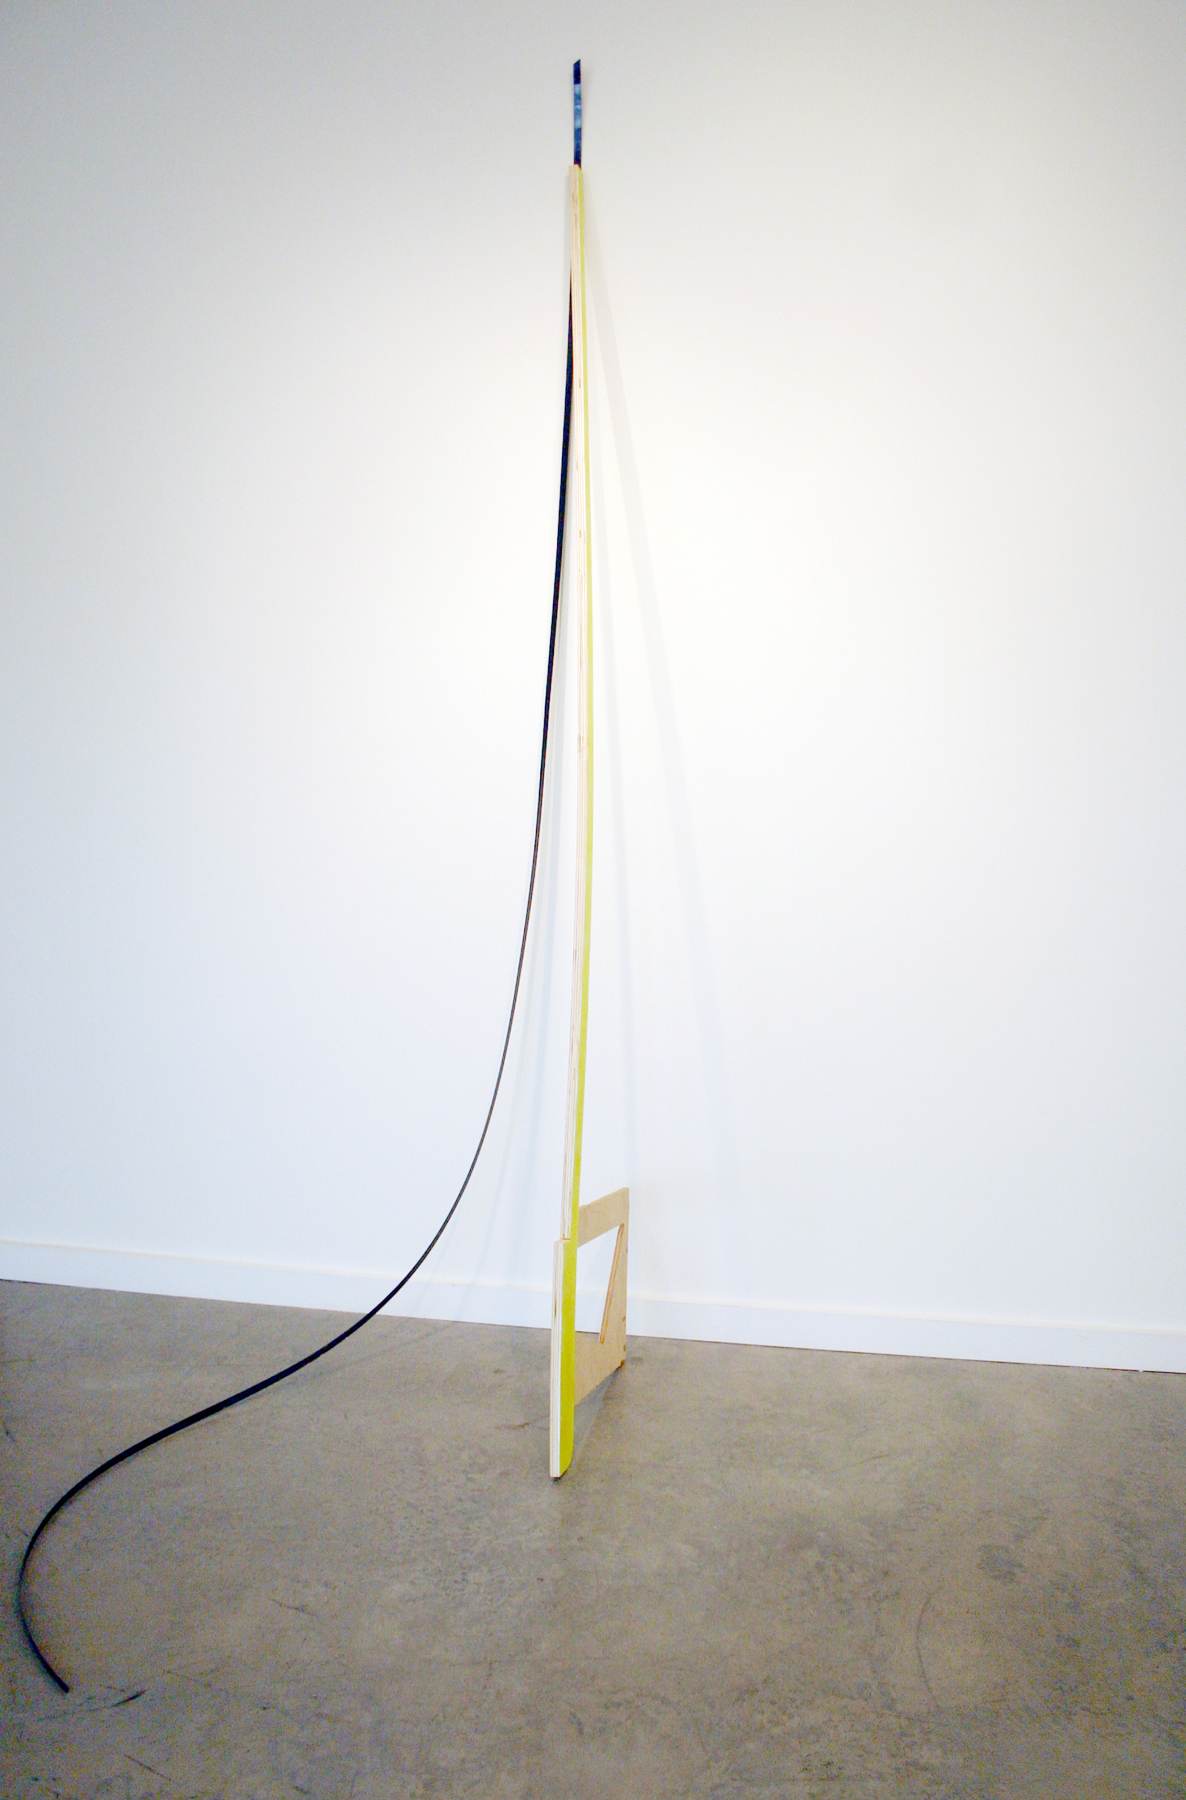   KIRK STOLLER   Untitled (bow),&nbsp; wood, paint and black strapping, 101" x 35" x 53.5", 2011 